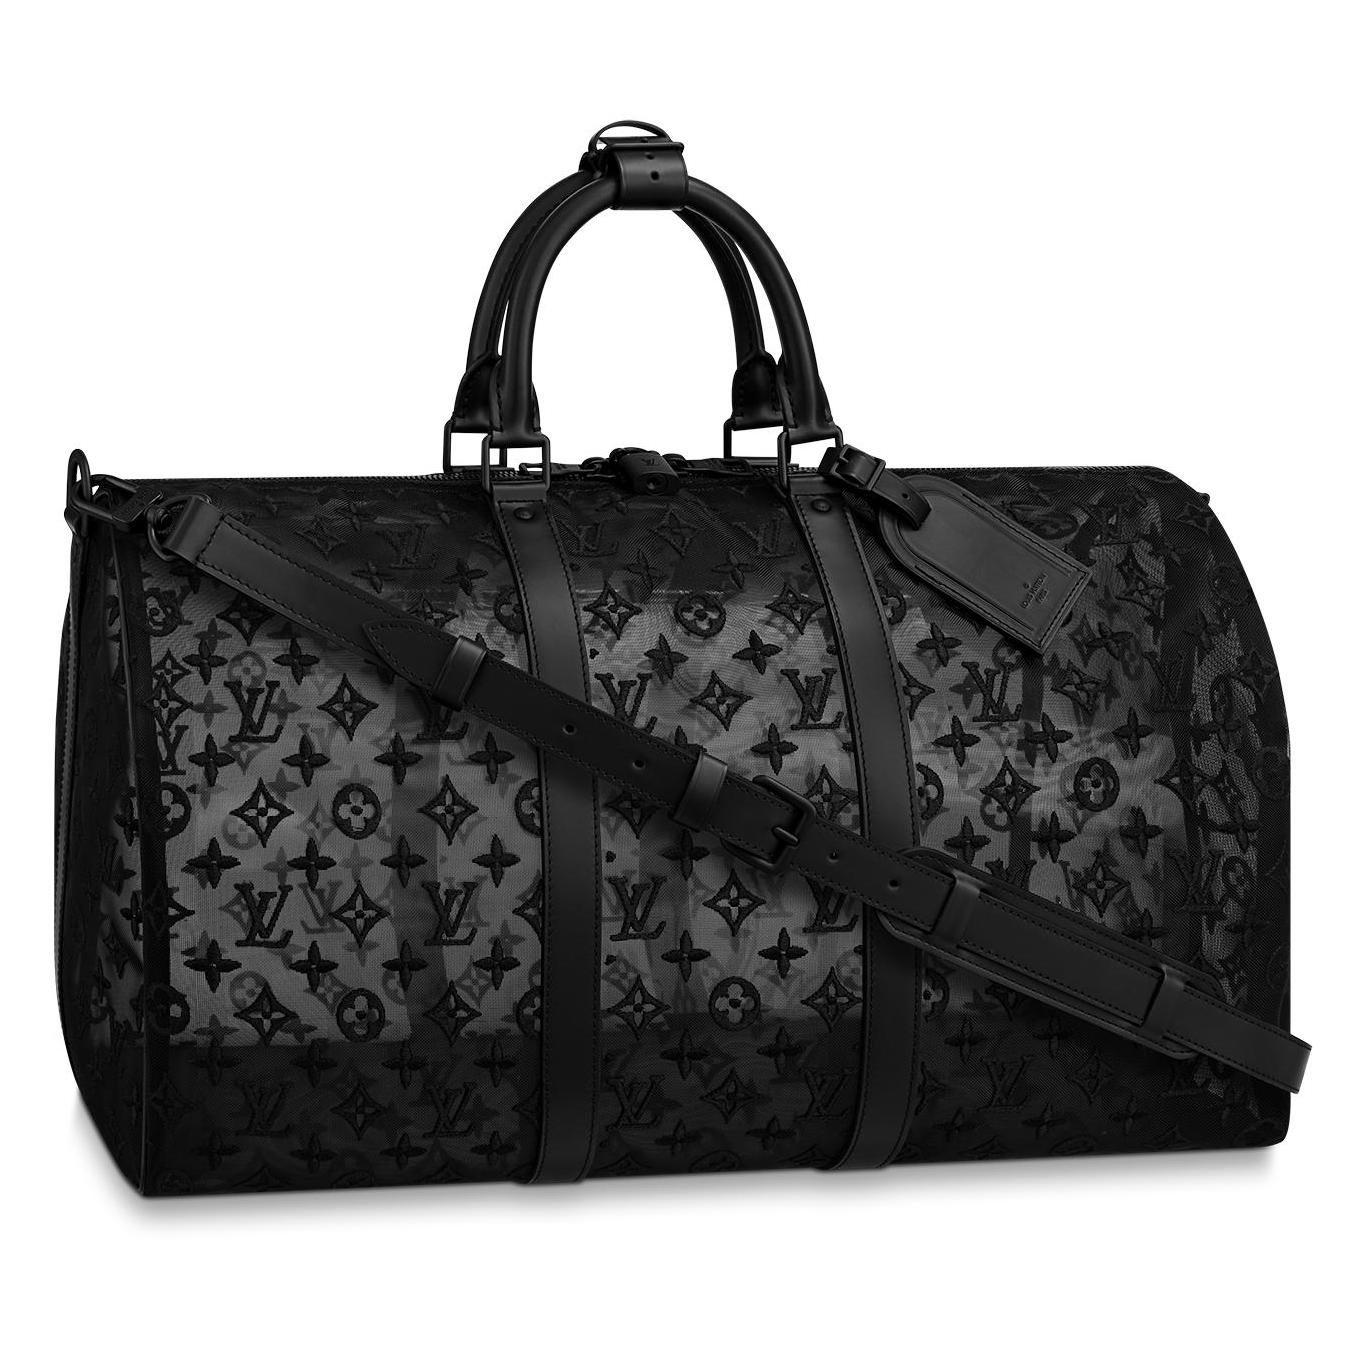 Louis Vuitton Monogram See Through Keepall 50 Bag Reference Guide | Spotted Fashion